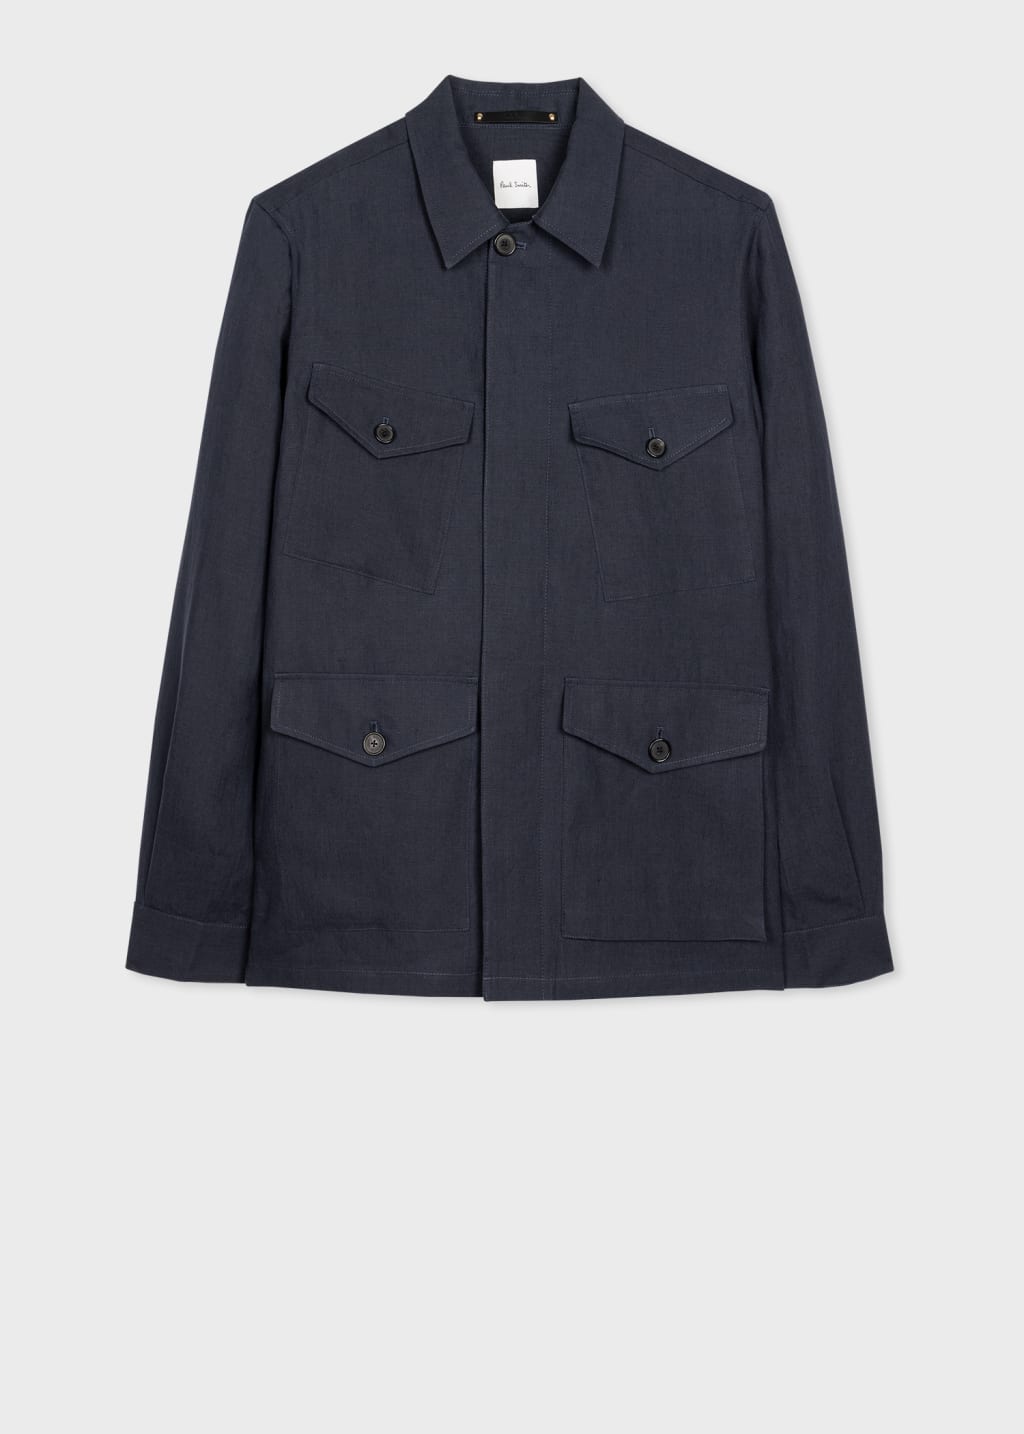 Front View - Navy Linen Field Jacket Paul Smith